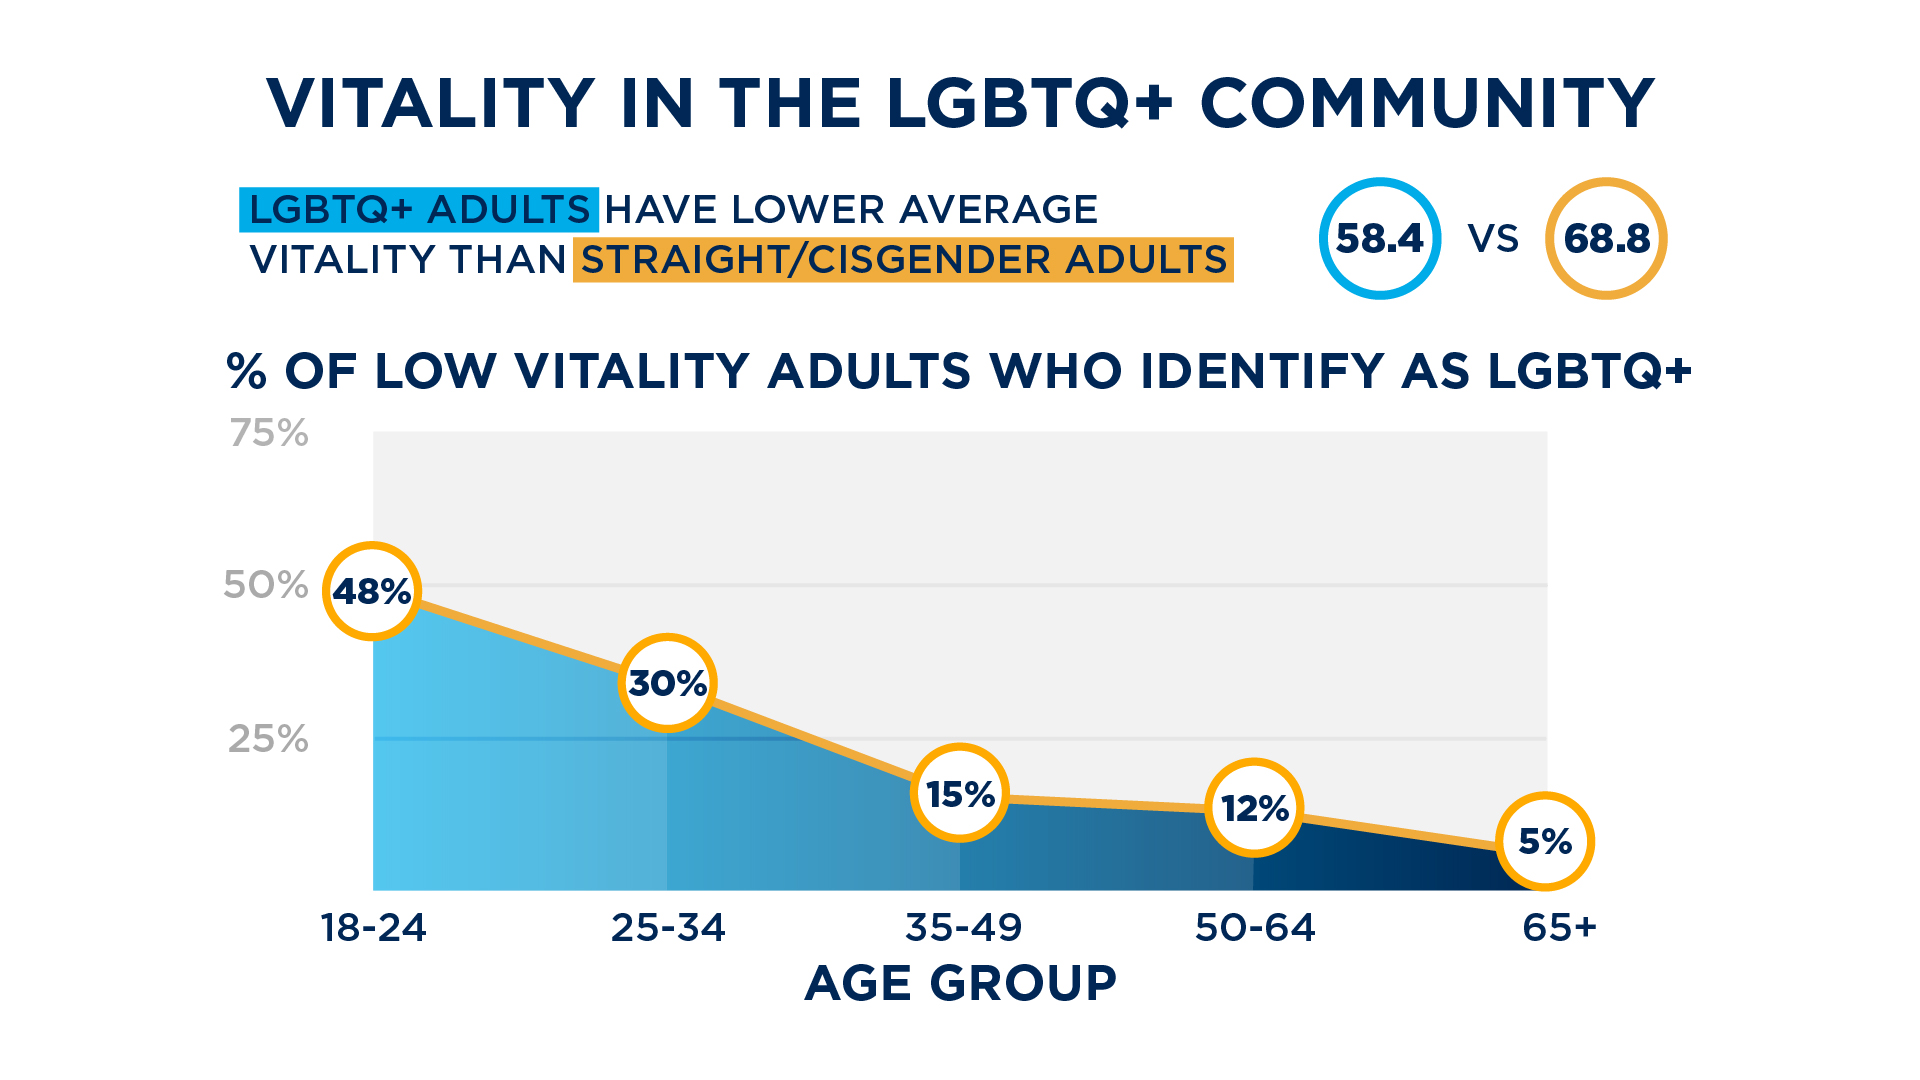 Nearly half of Gen Z adults with low vitality identify as LGBTQ+, and LGBTQ+ adults have substantially lower vitality levels than heterosexual, cisgender adults.